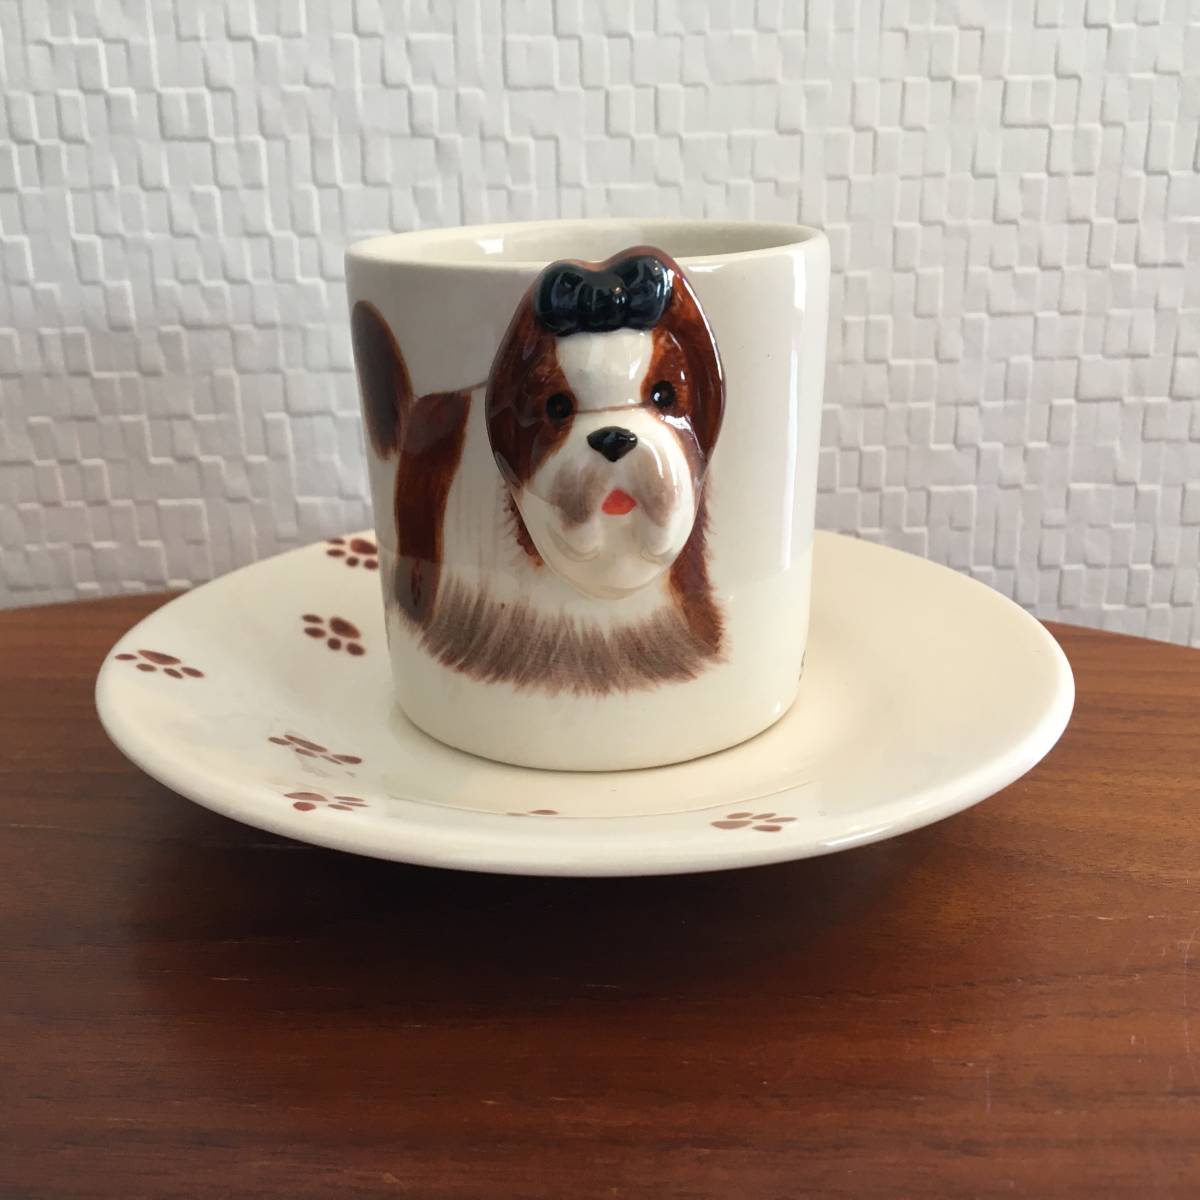  She's -l cup & saucer set animal 3D solid collection hand made gift ceramics dog coffee CUP Espresso ( new goods )( prompt decision )